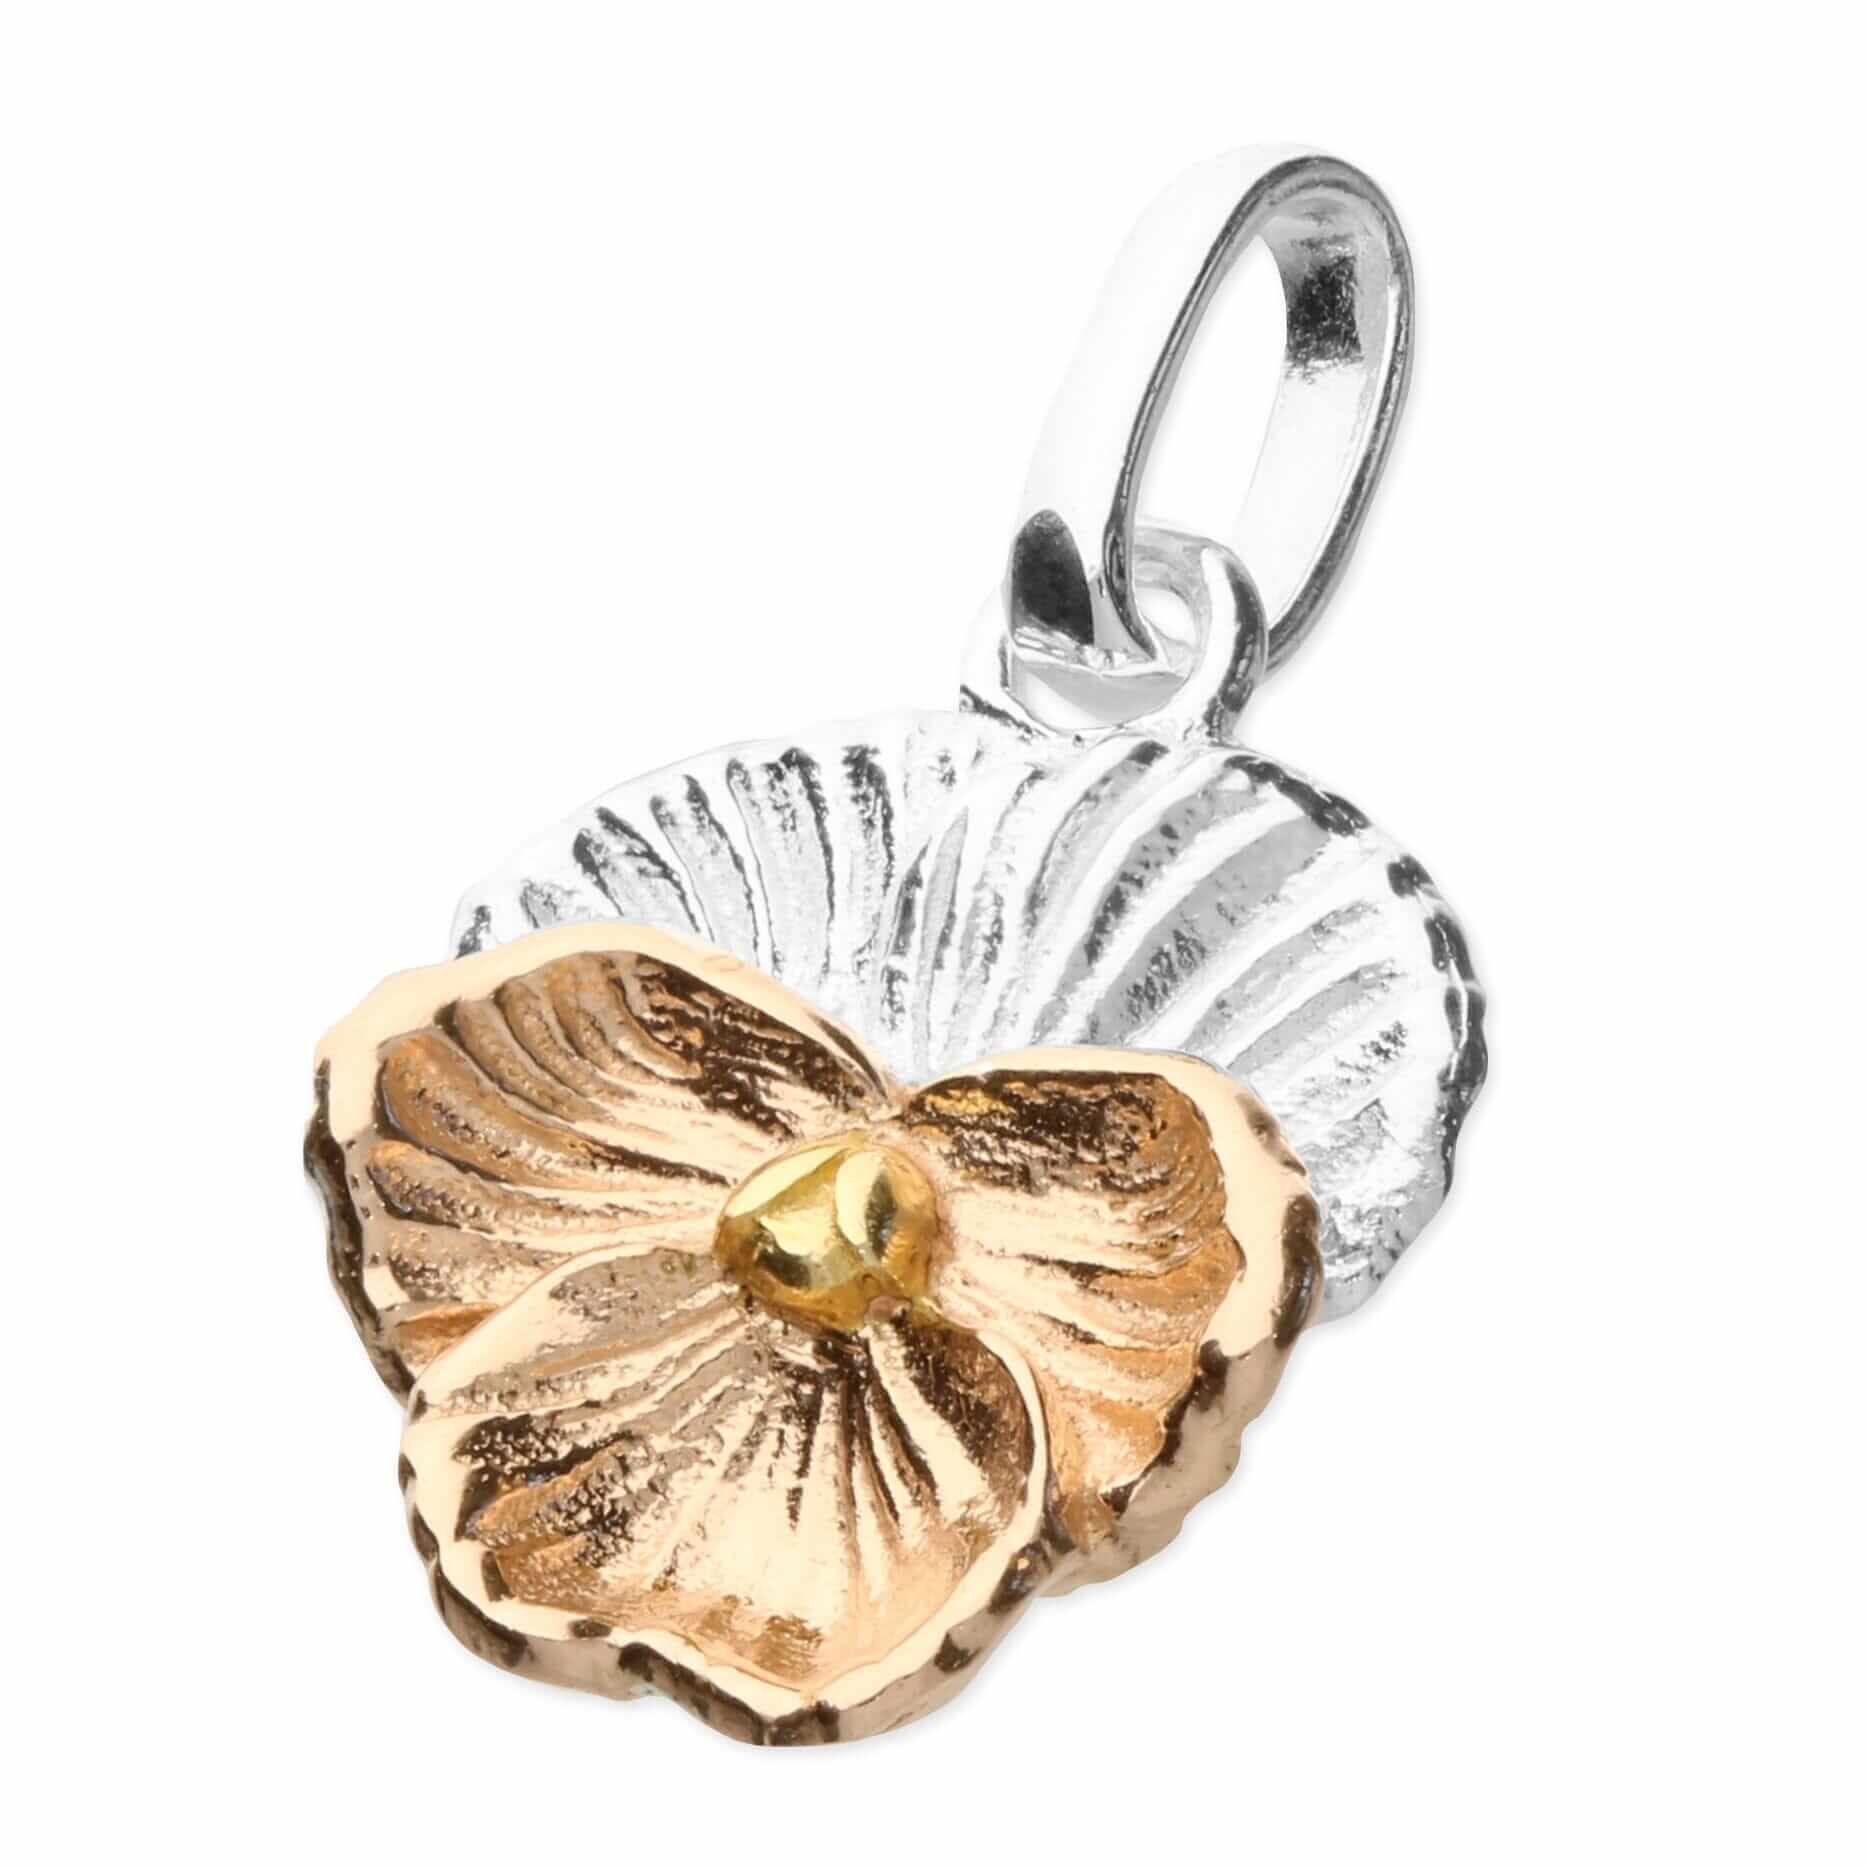 Violet Flower Charm Pendant In Sterling Silver & 18 Carat Gold - February Birth Flower - Twelve Silver Trees